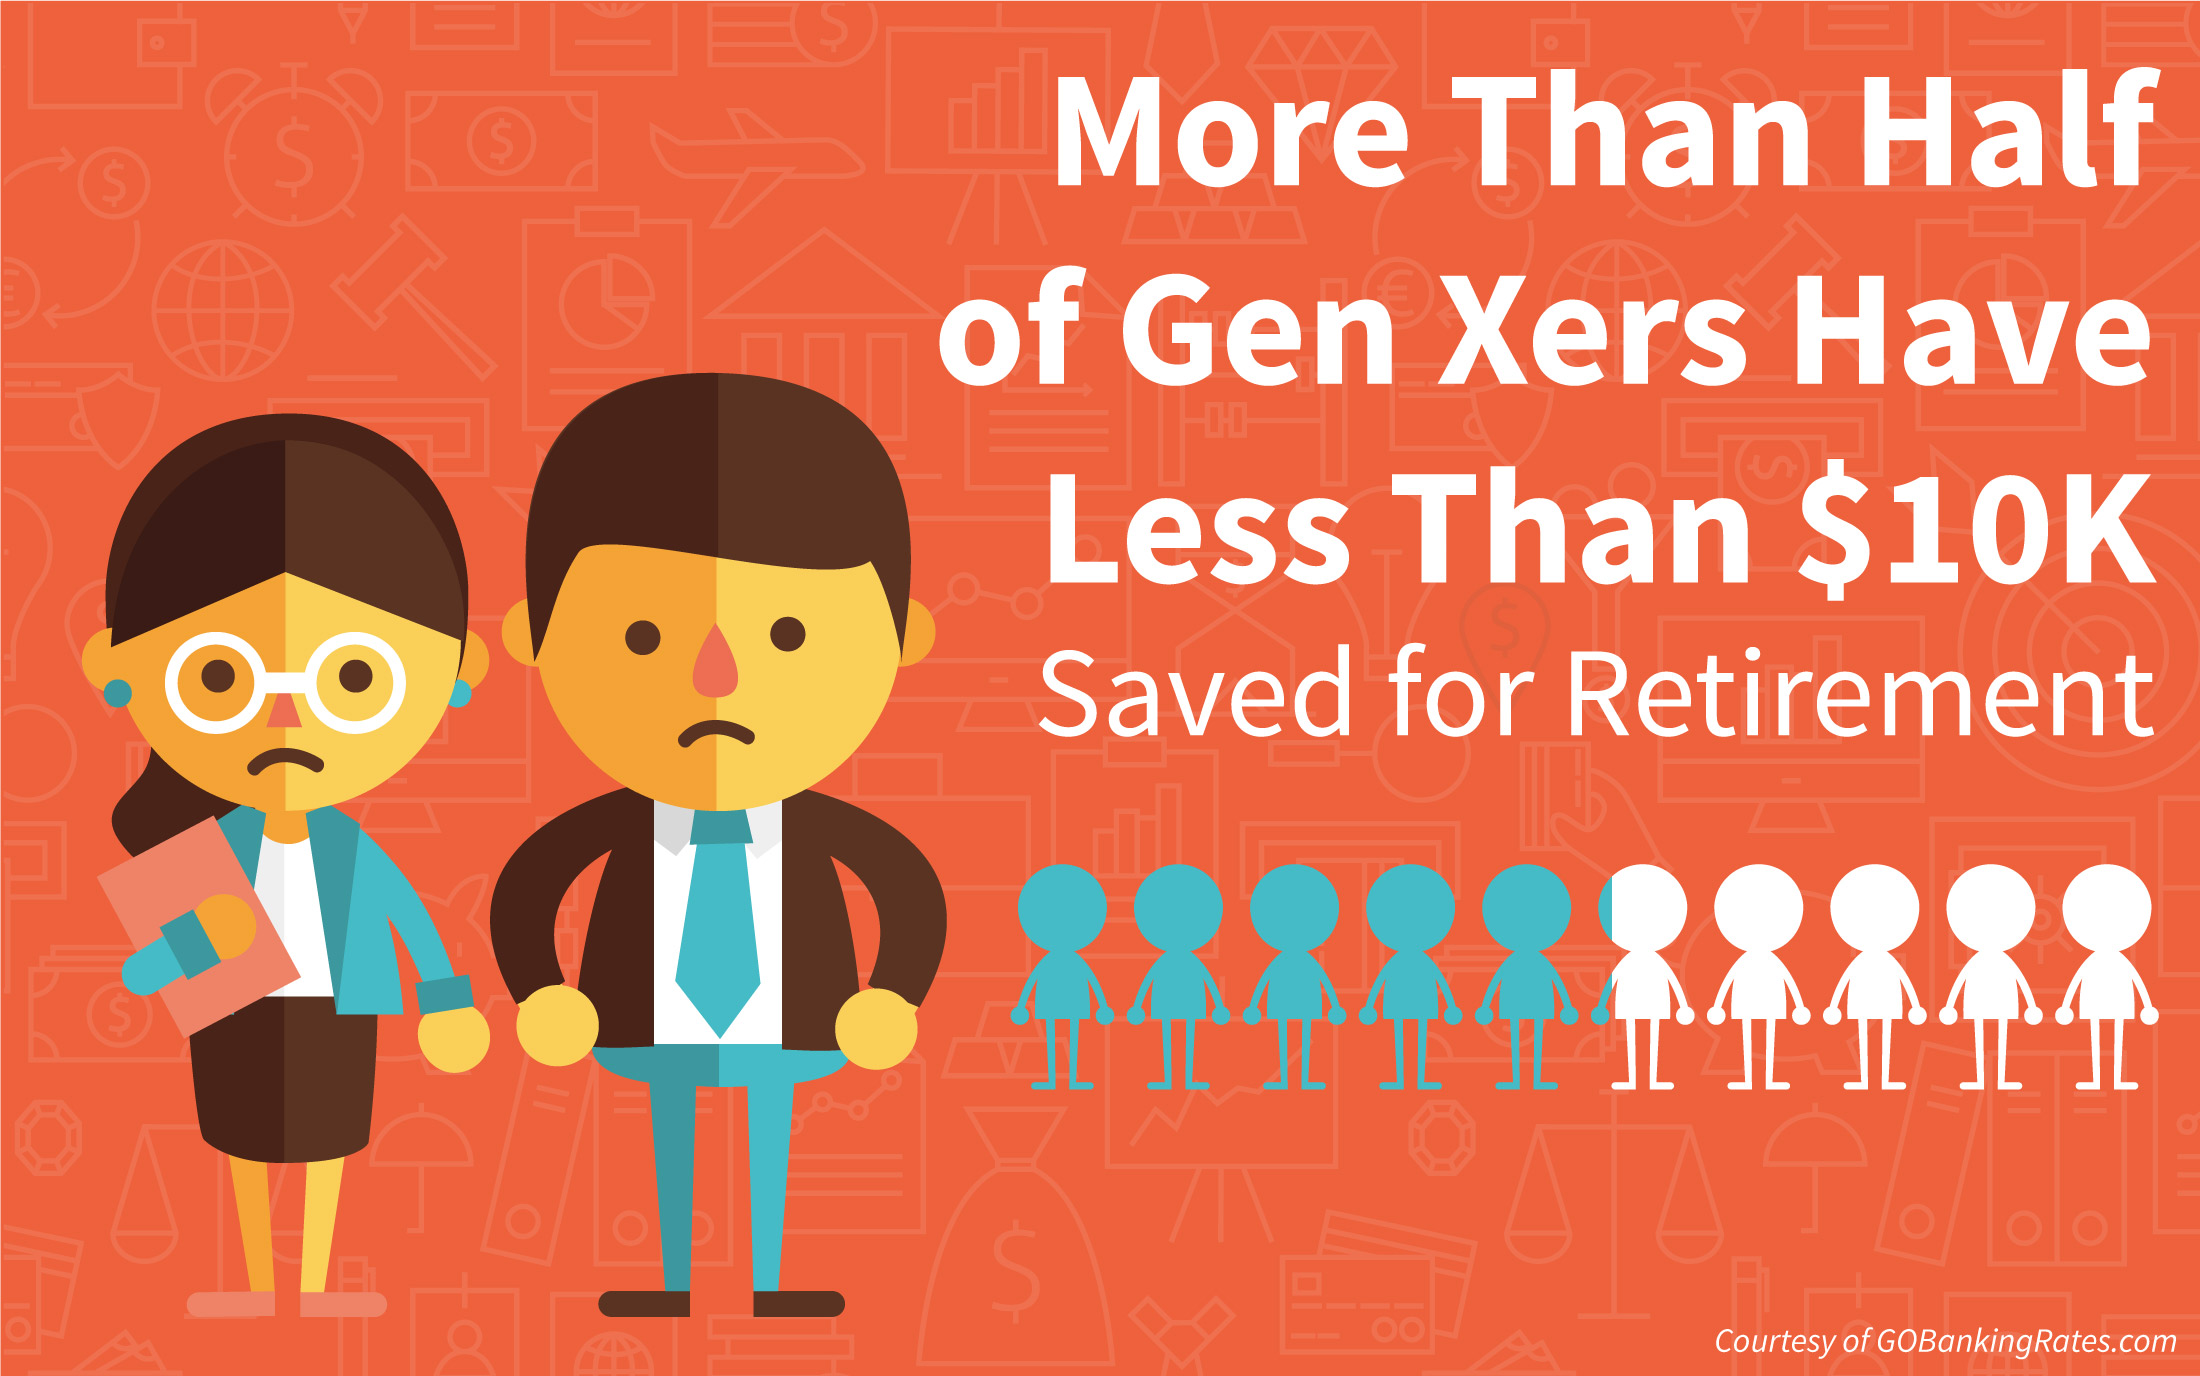 Survey: Most Gen Xers Are Behind on Retirement Savings